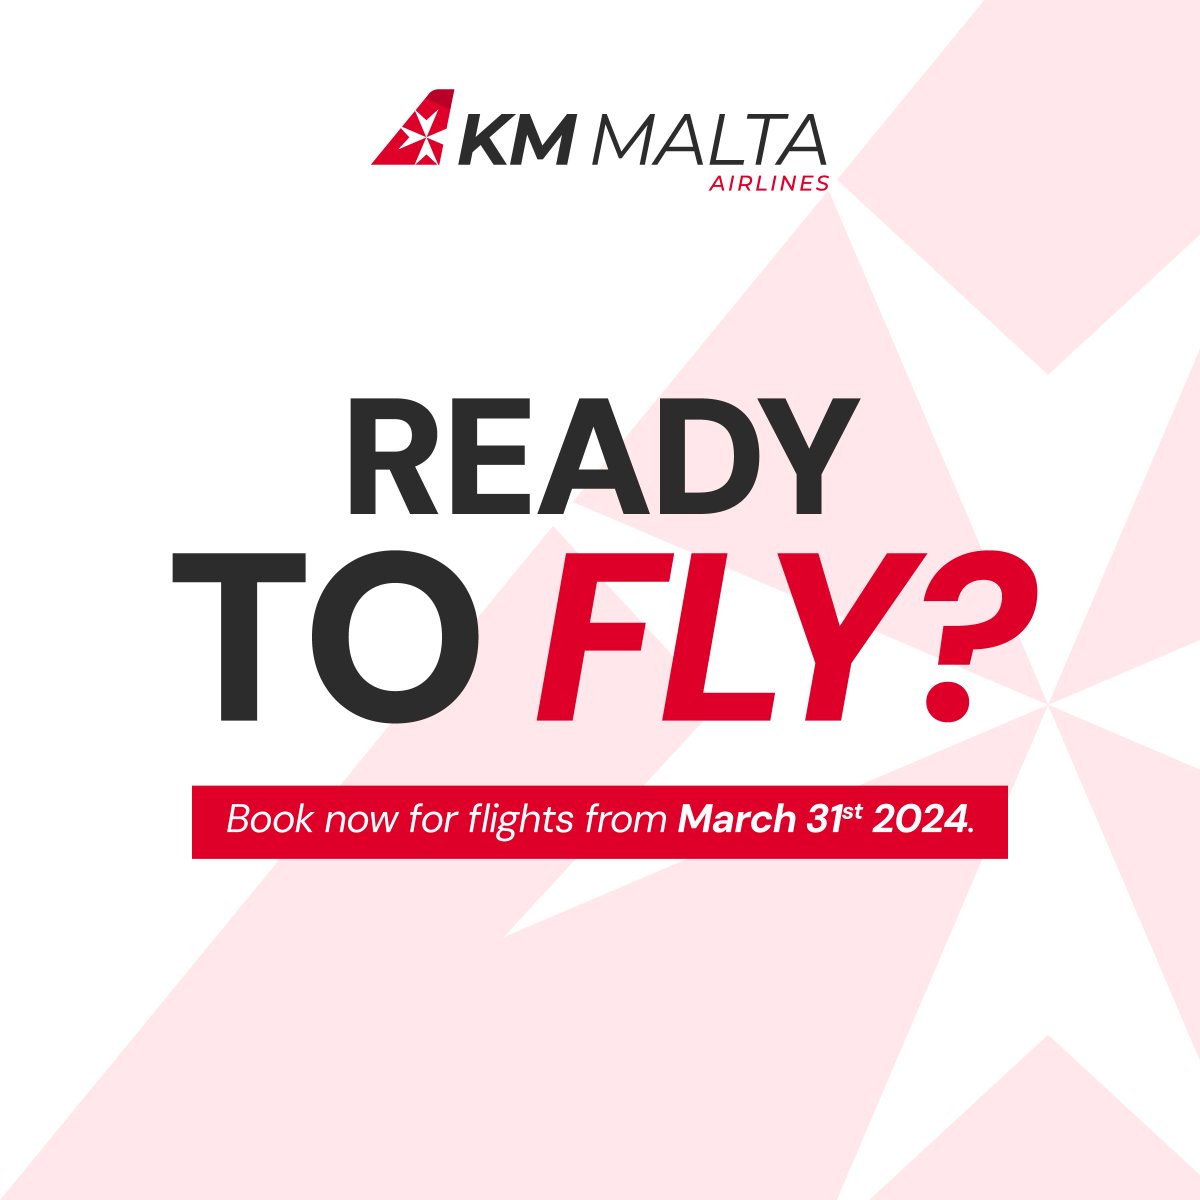 WE’RE TAKING OFF ✈ You can now book your flights from 31st March 2024 onwards with us! Flights can be booked by: 👉 Calling us on +356 2135 6000 👉 Visiting our Sales Office at Malta International Airport 👉 Getting in touch with your trusted Travel Agent.